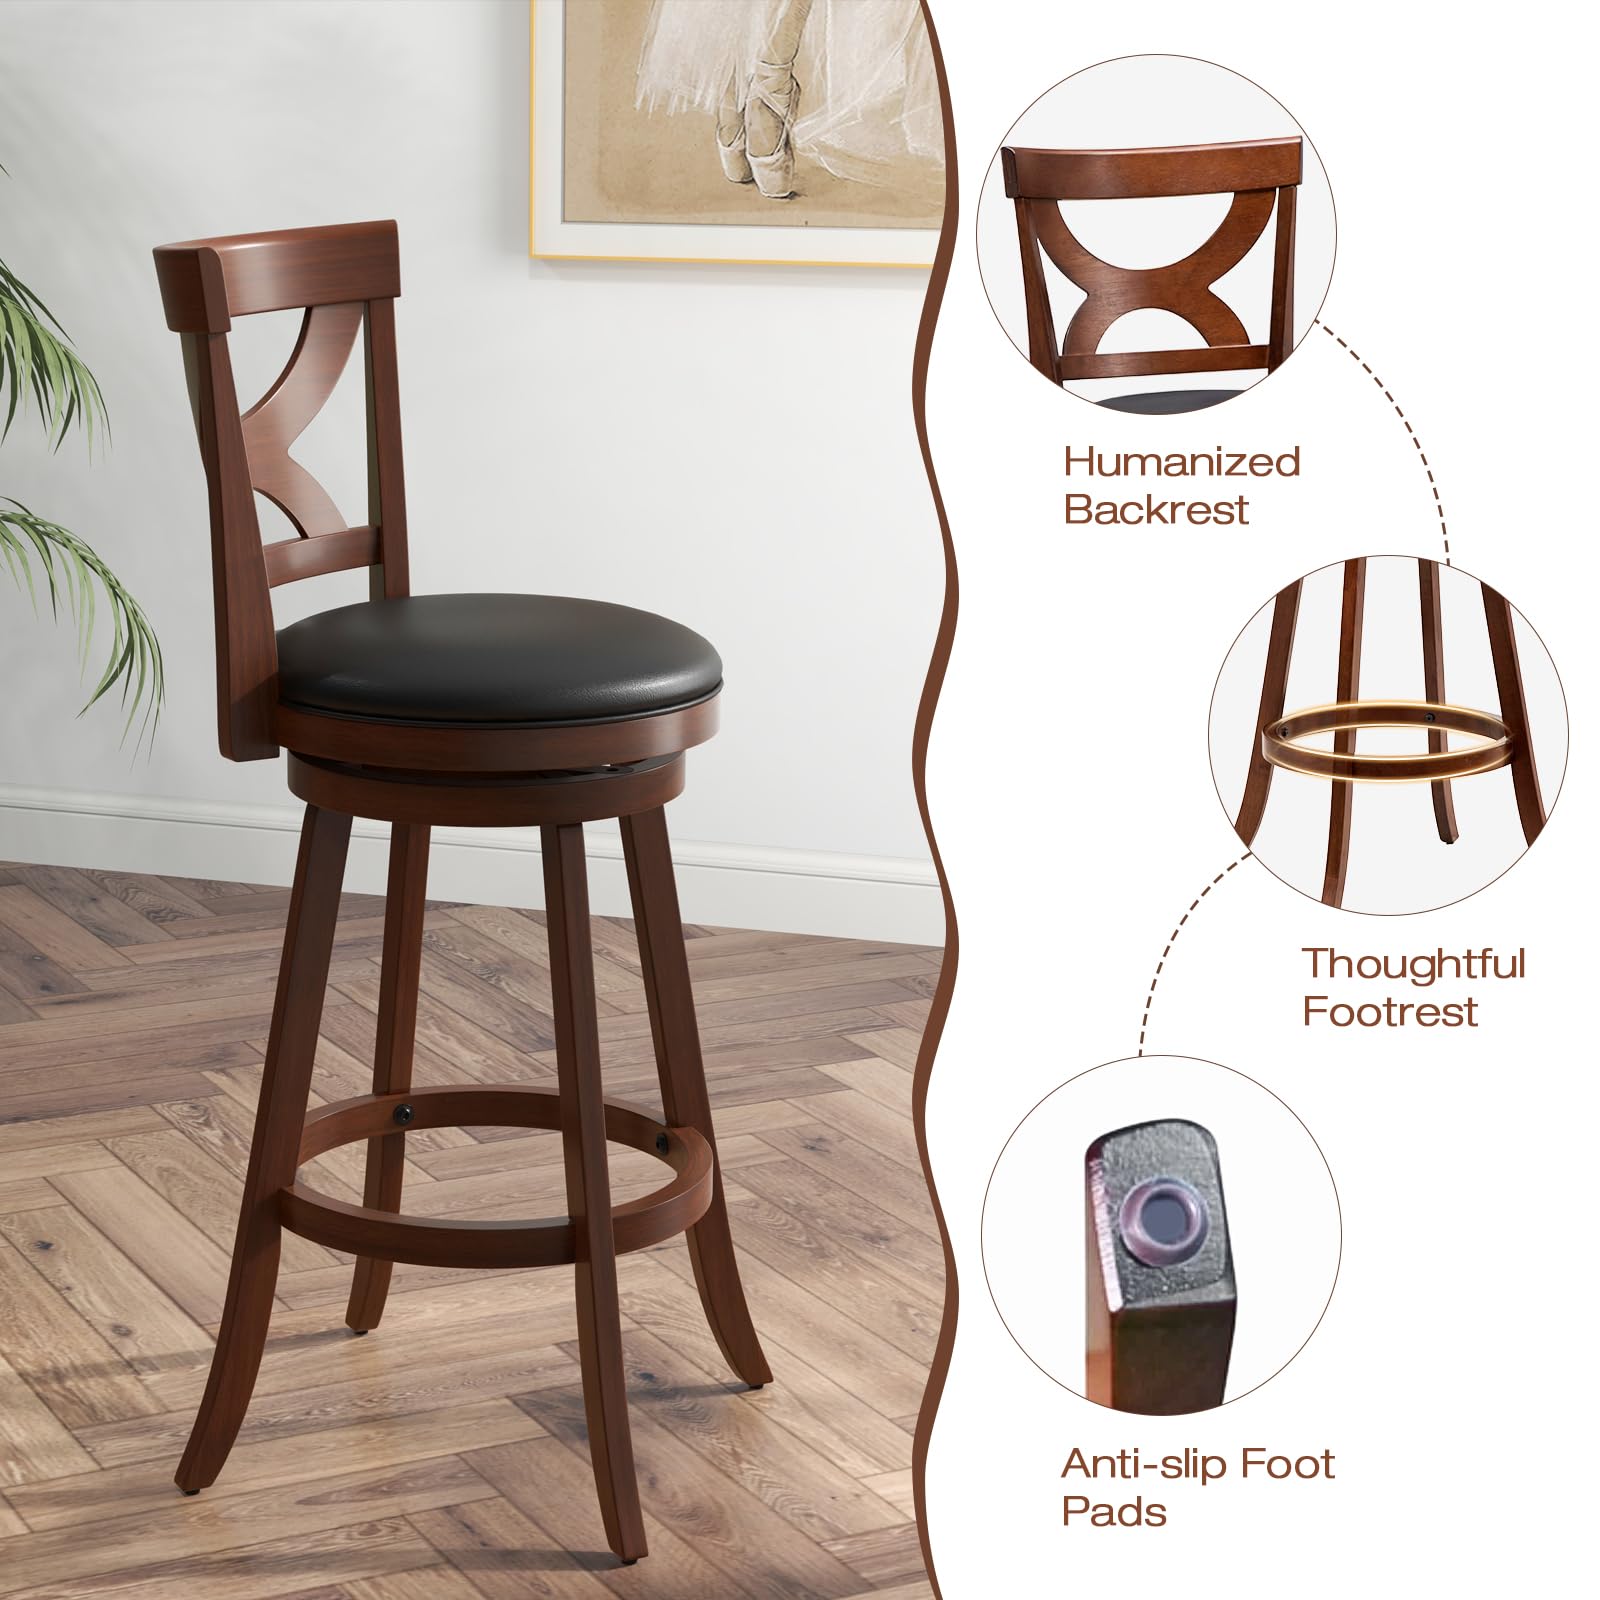 Giantex Bar Stools Set of 2, 30.5" Counter Height Bar Dining Chairs with Back & Footrest, Rubber Wood Frame